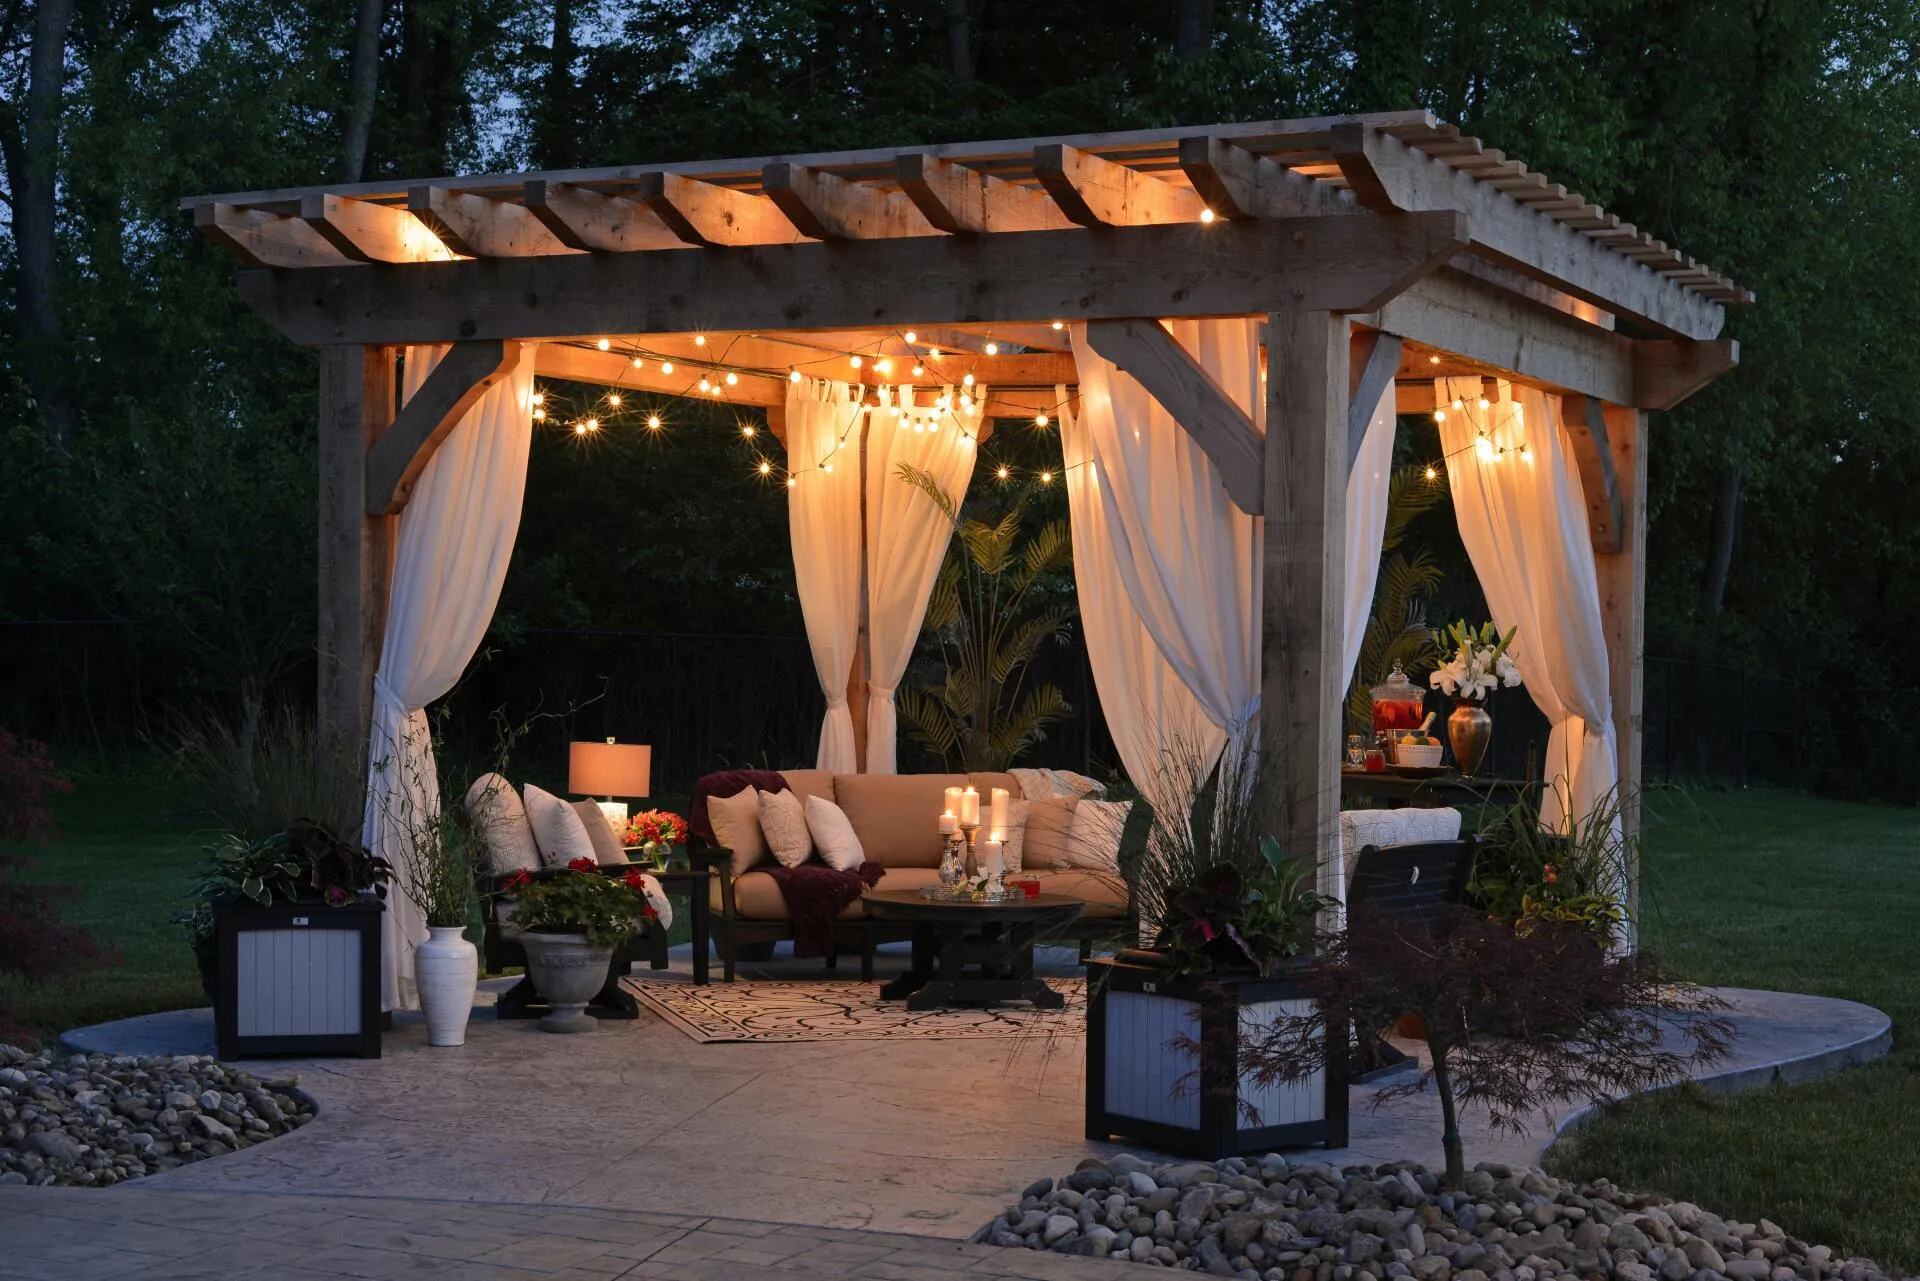 Decorated outdoor living space